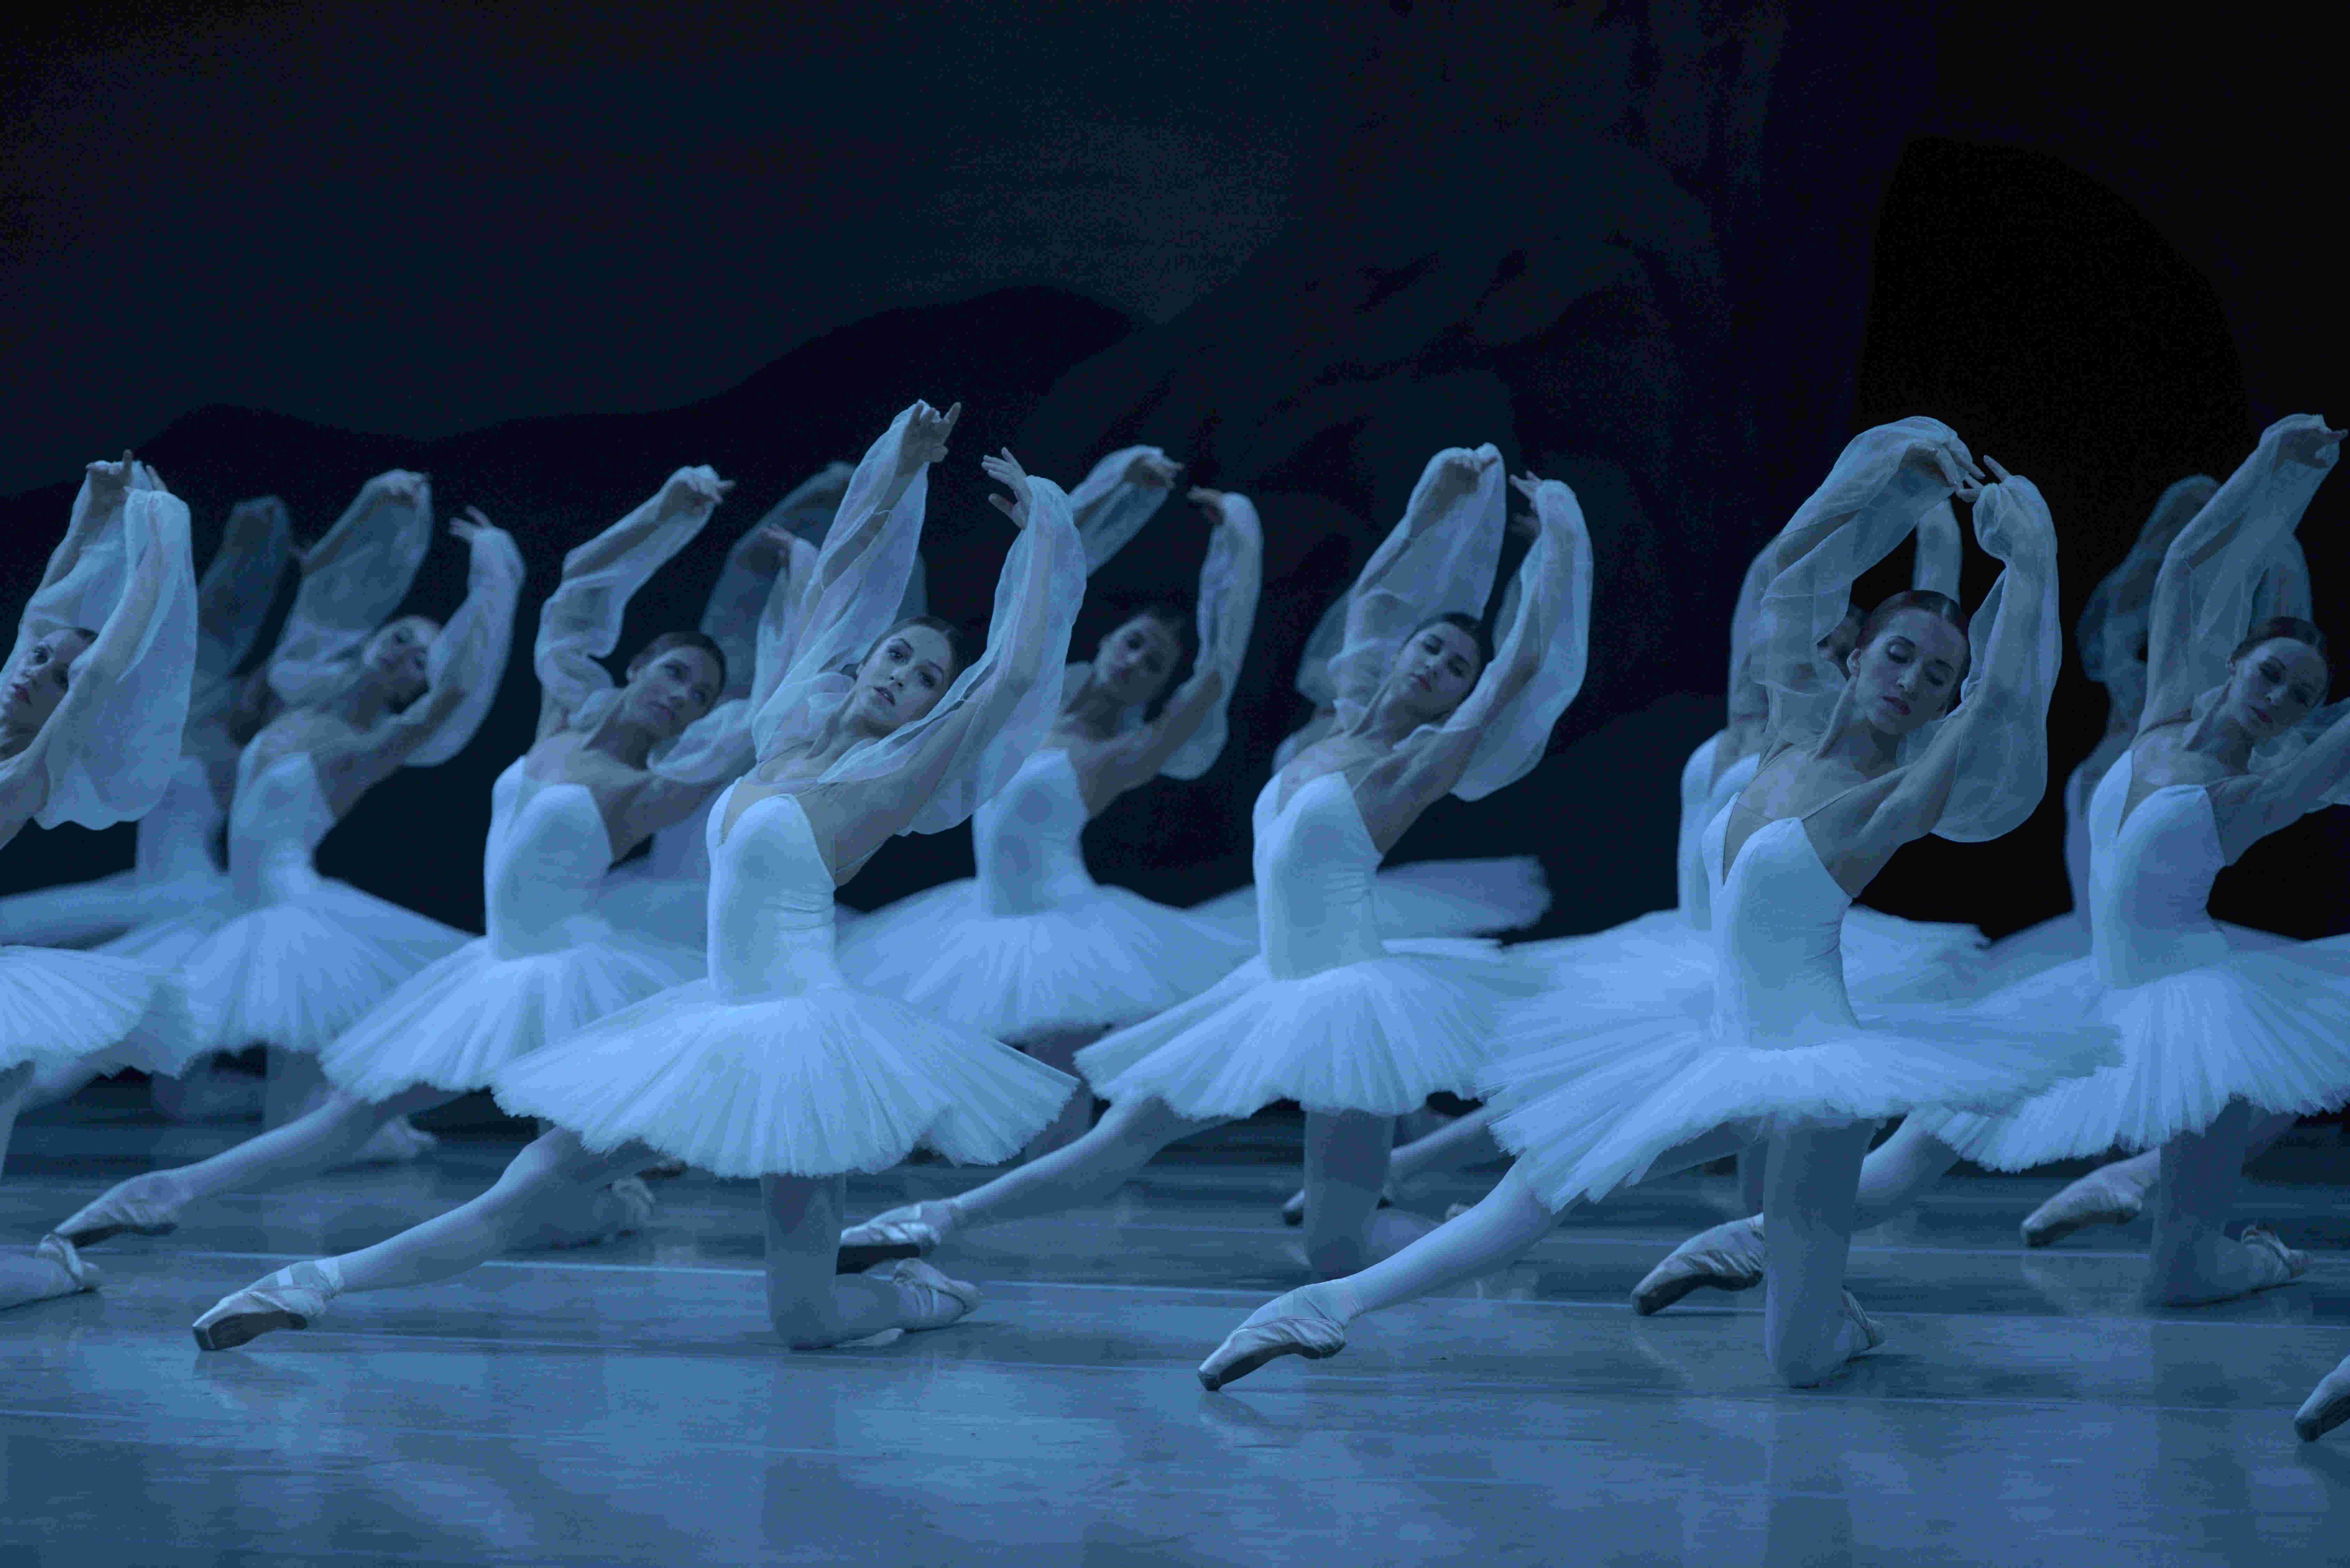 The corps de ballet as the Shades in the Mariinsky Ballet's production of La Bayadere